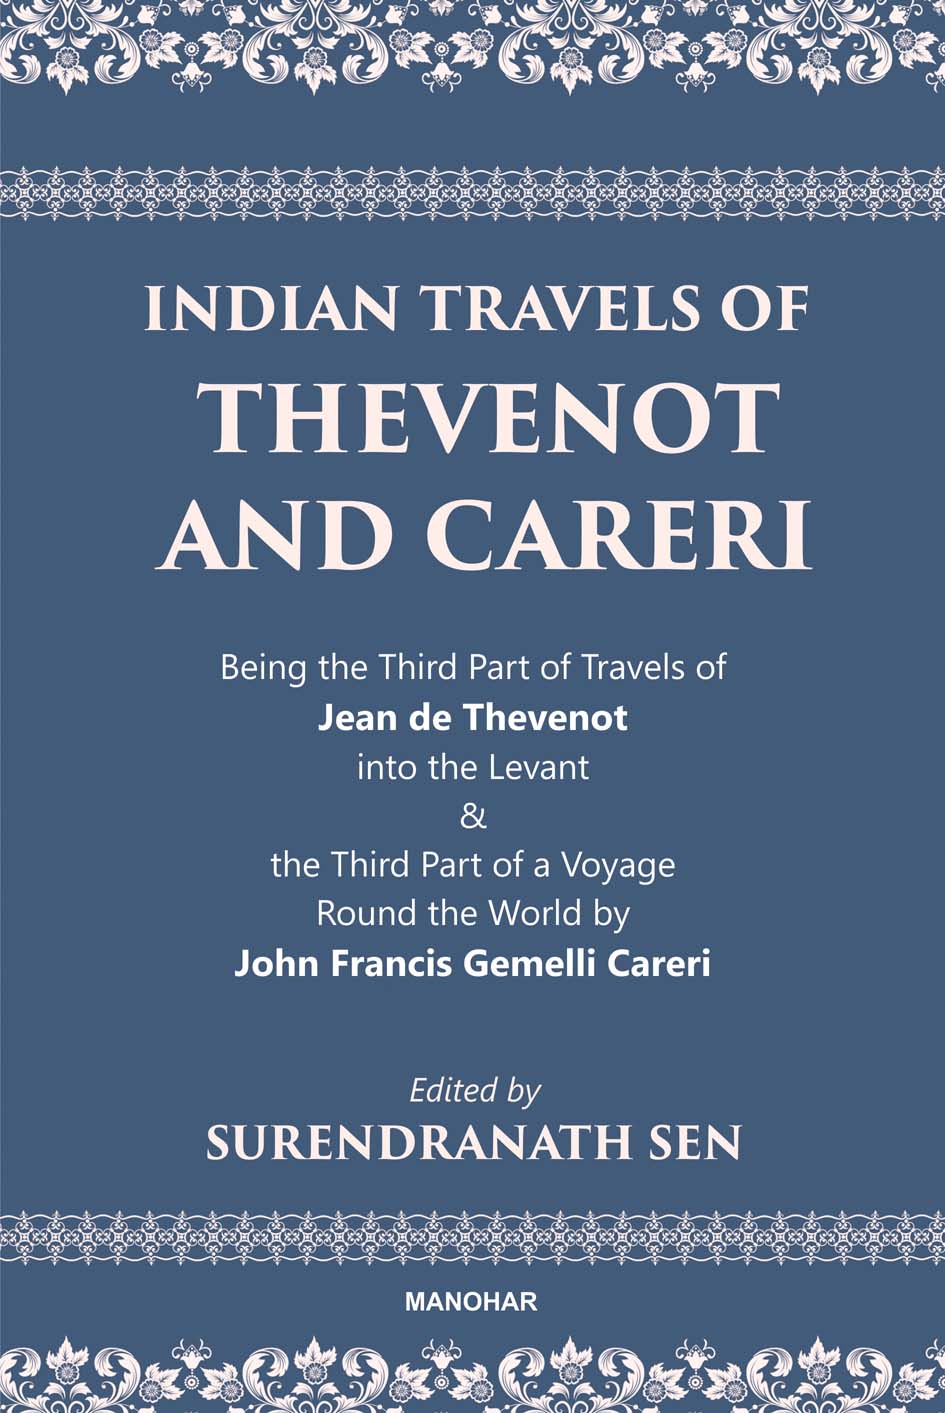 Indian Travels of Thevenot and Careri: Being the Third Part of Travels of Jean de Thevenot into the Levant and The Third Part of a Voyage Round the World by John Francis Gemelli Careri